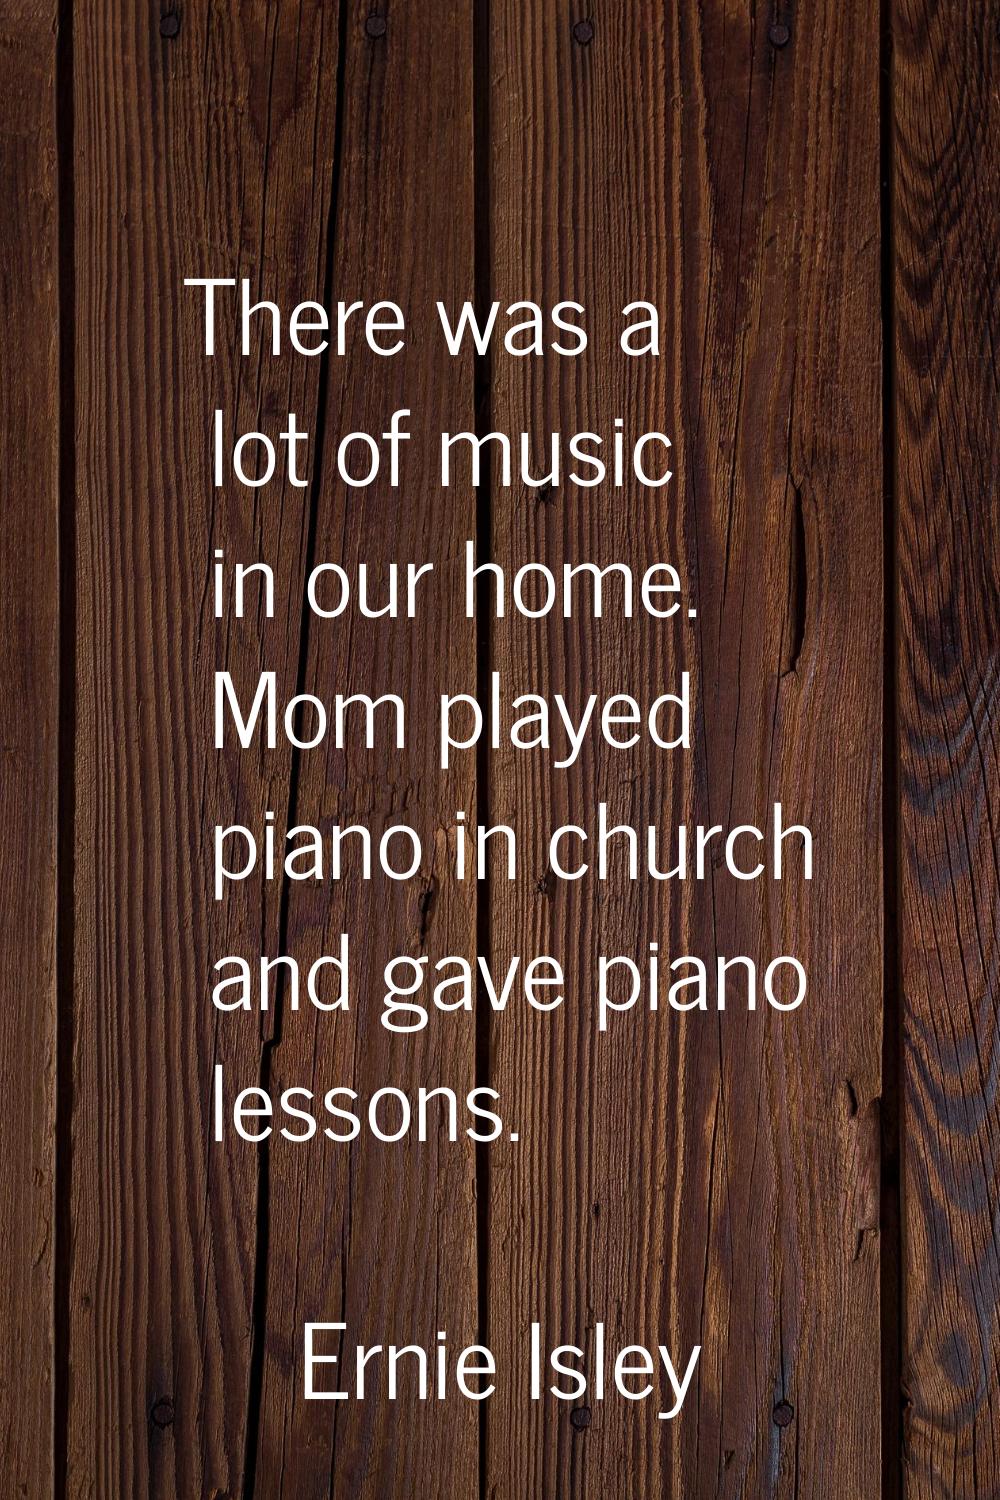 There was a lot of music in our home. Mom played piano in church and gave piano lessons.